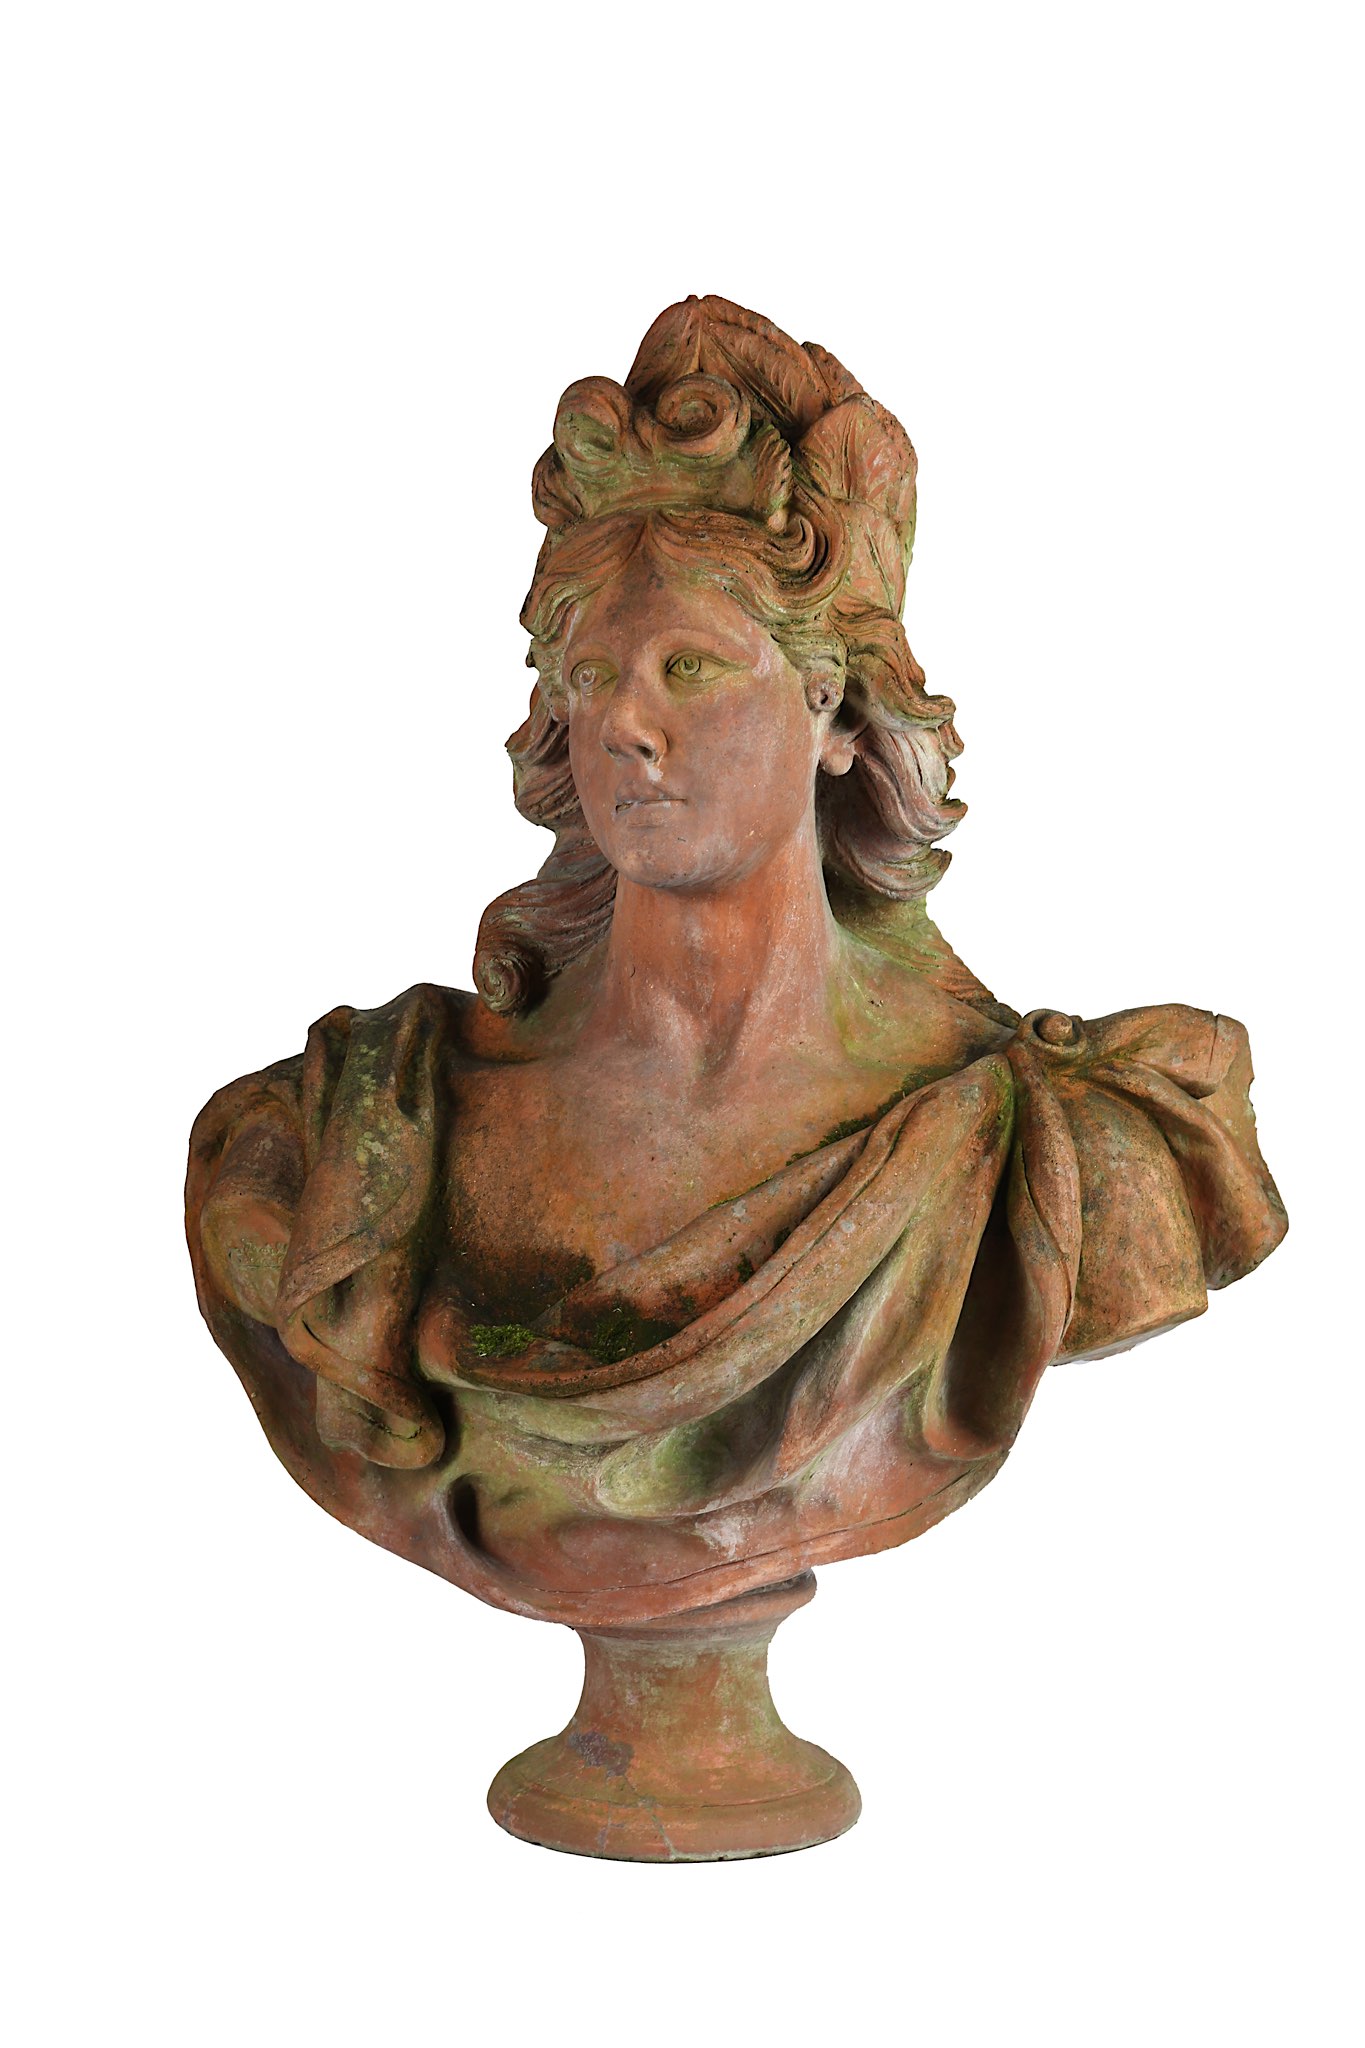 AN 18TH CENTURY STYLE LIFE-SIZE TERRACOTTA BUST OF PEACE looking to dexter and wearing a laurel